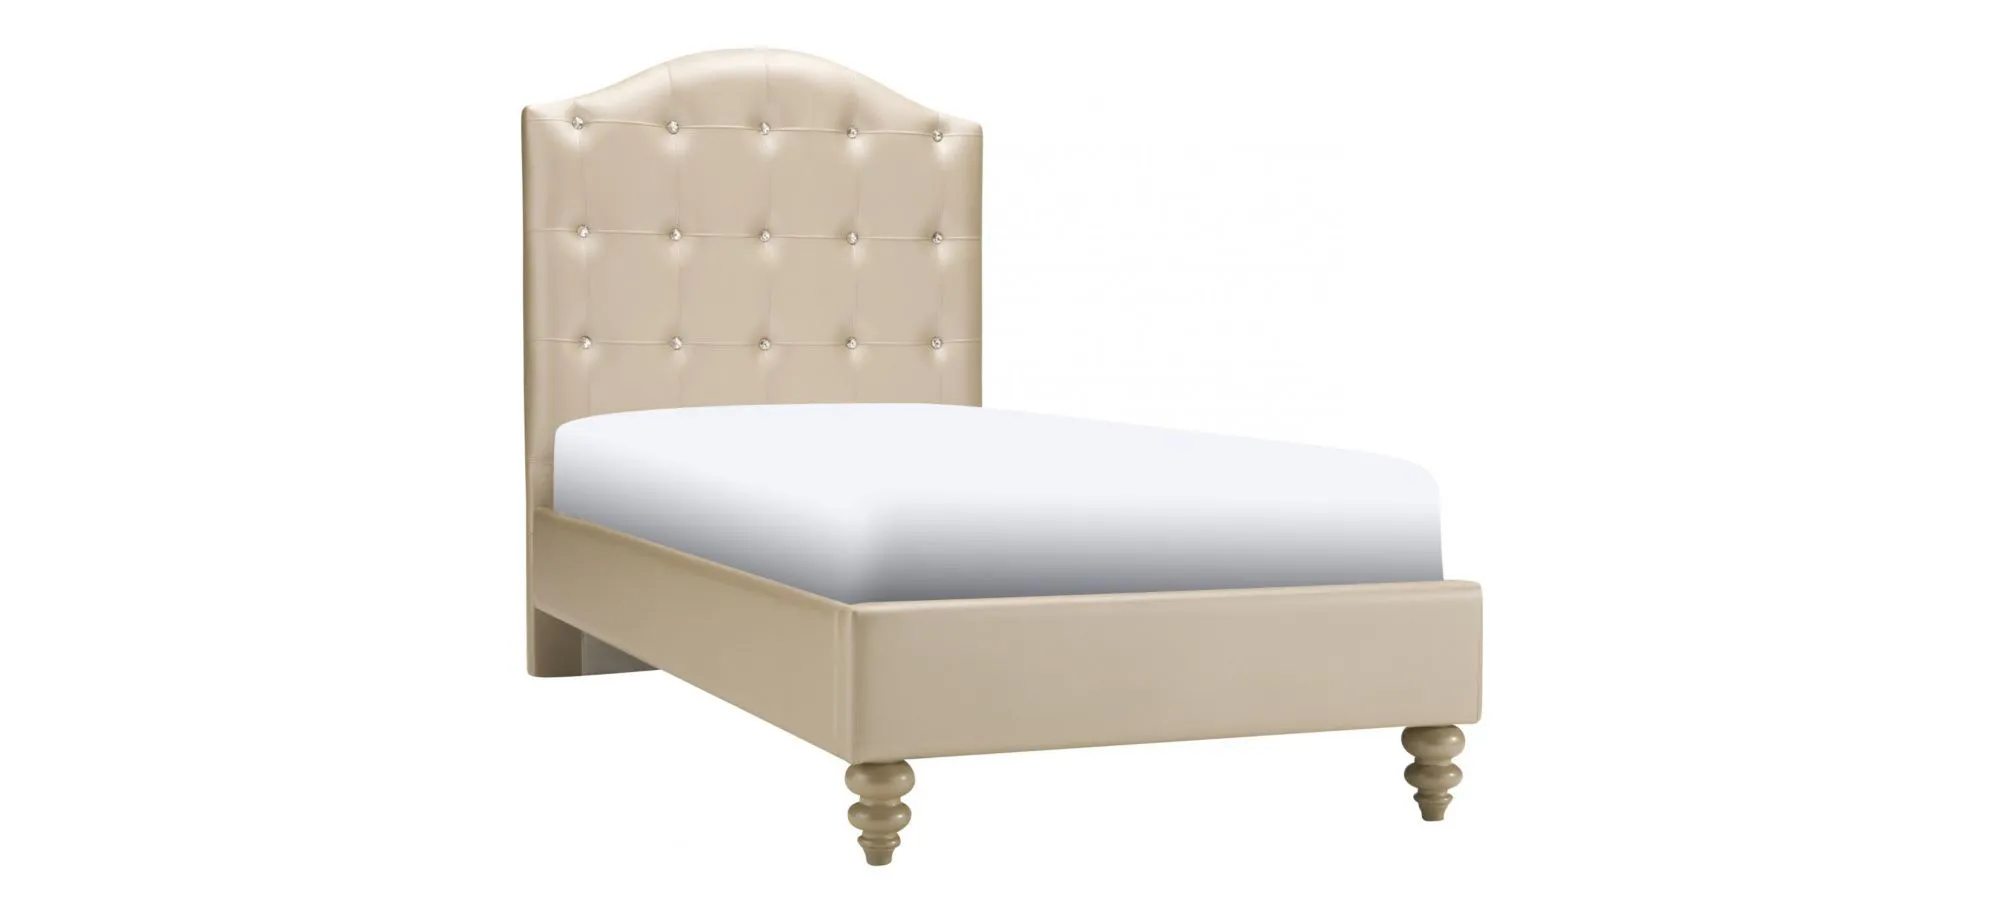 Paris Bed in Champagne / Pearl by Najarian